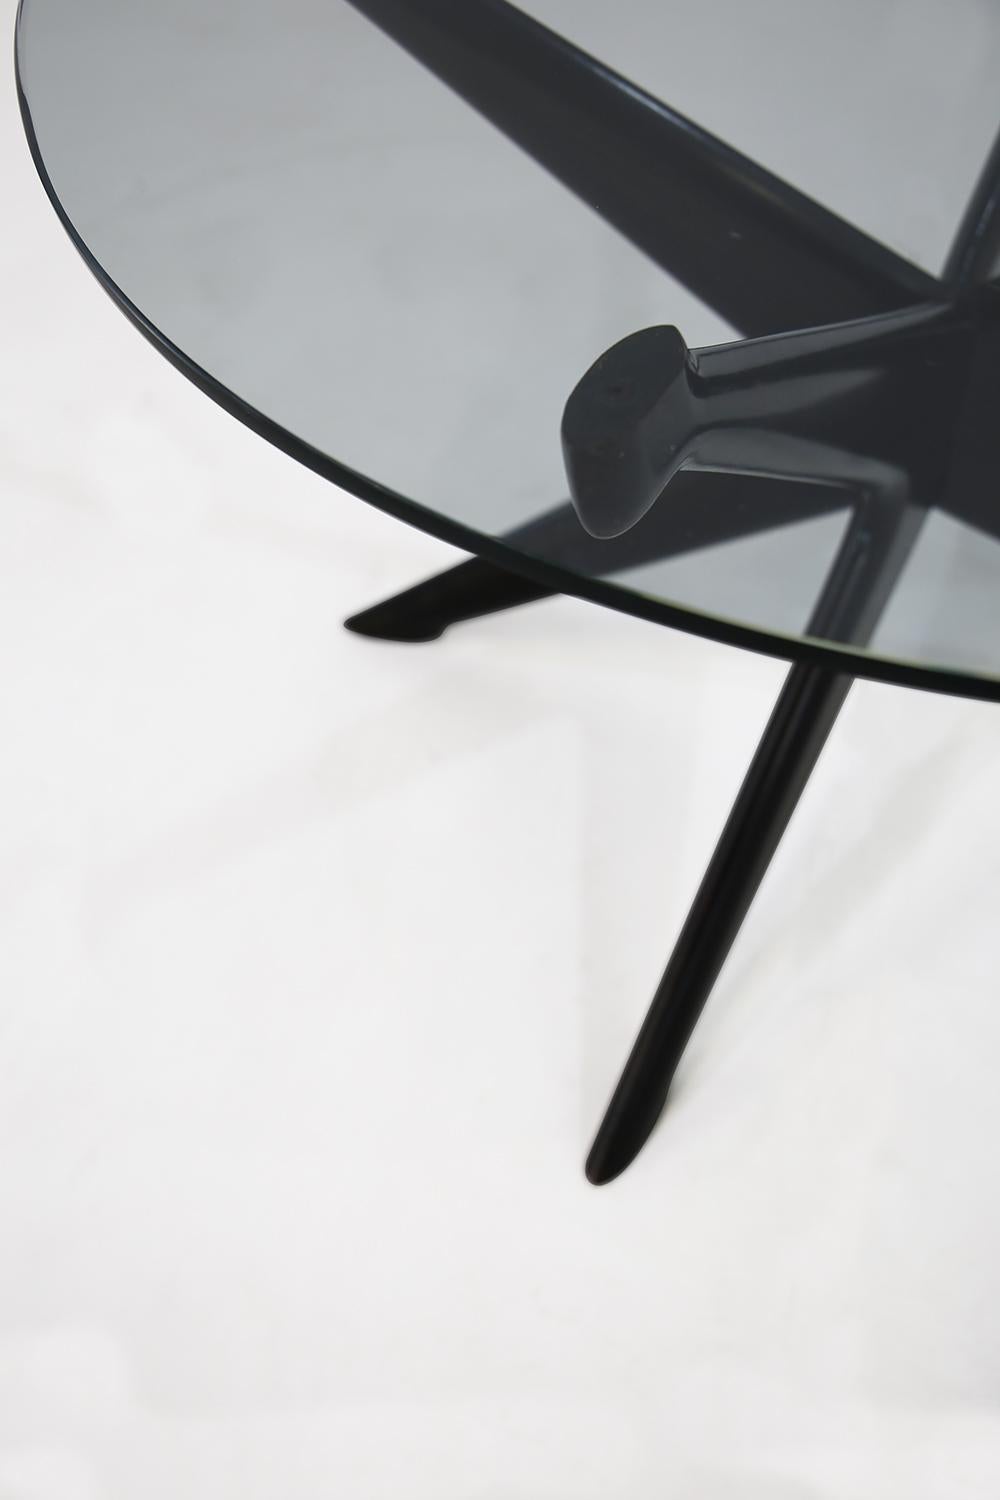 Occasional table designed by Ico Parisi 
Manufactured Fratelli Rizzi Intimiano Italy
the table can be used as a coffee table or as a side table
Good condition, in ebonized wood
glass in good condition.
beautiful example of 1950s Italian